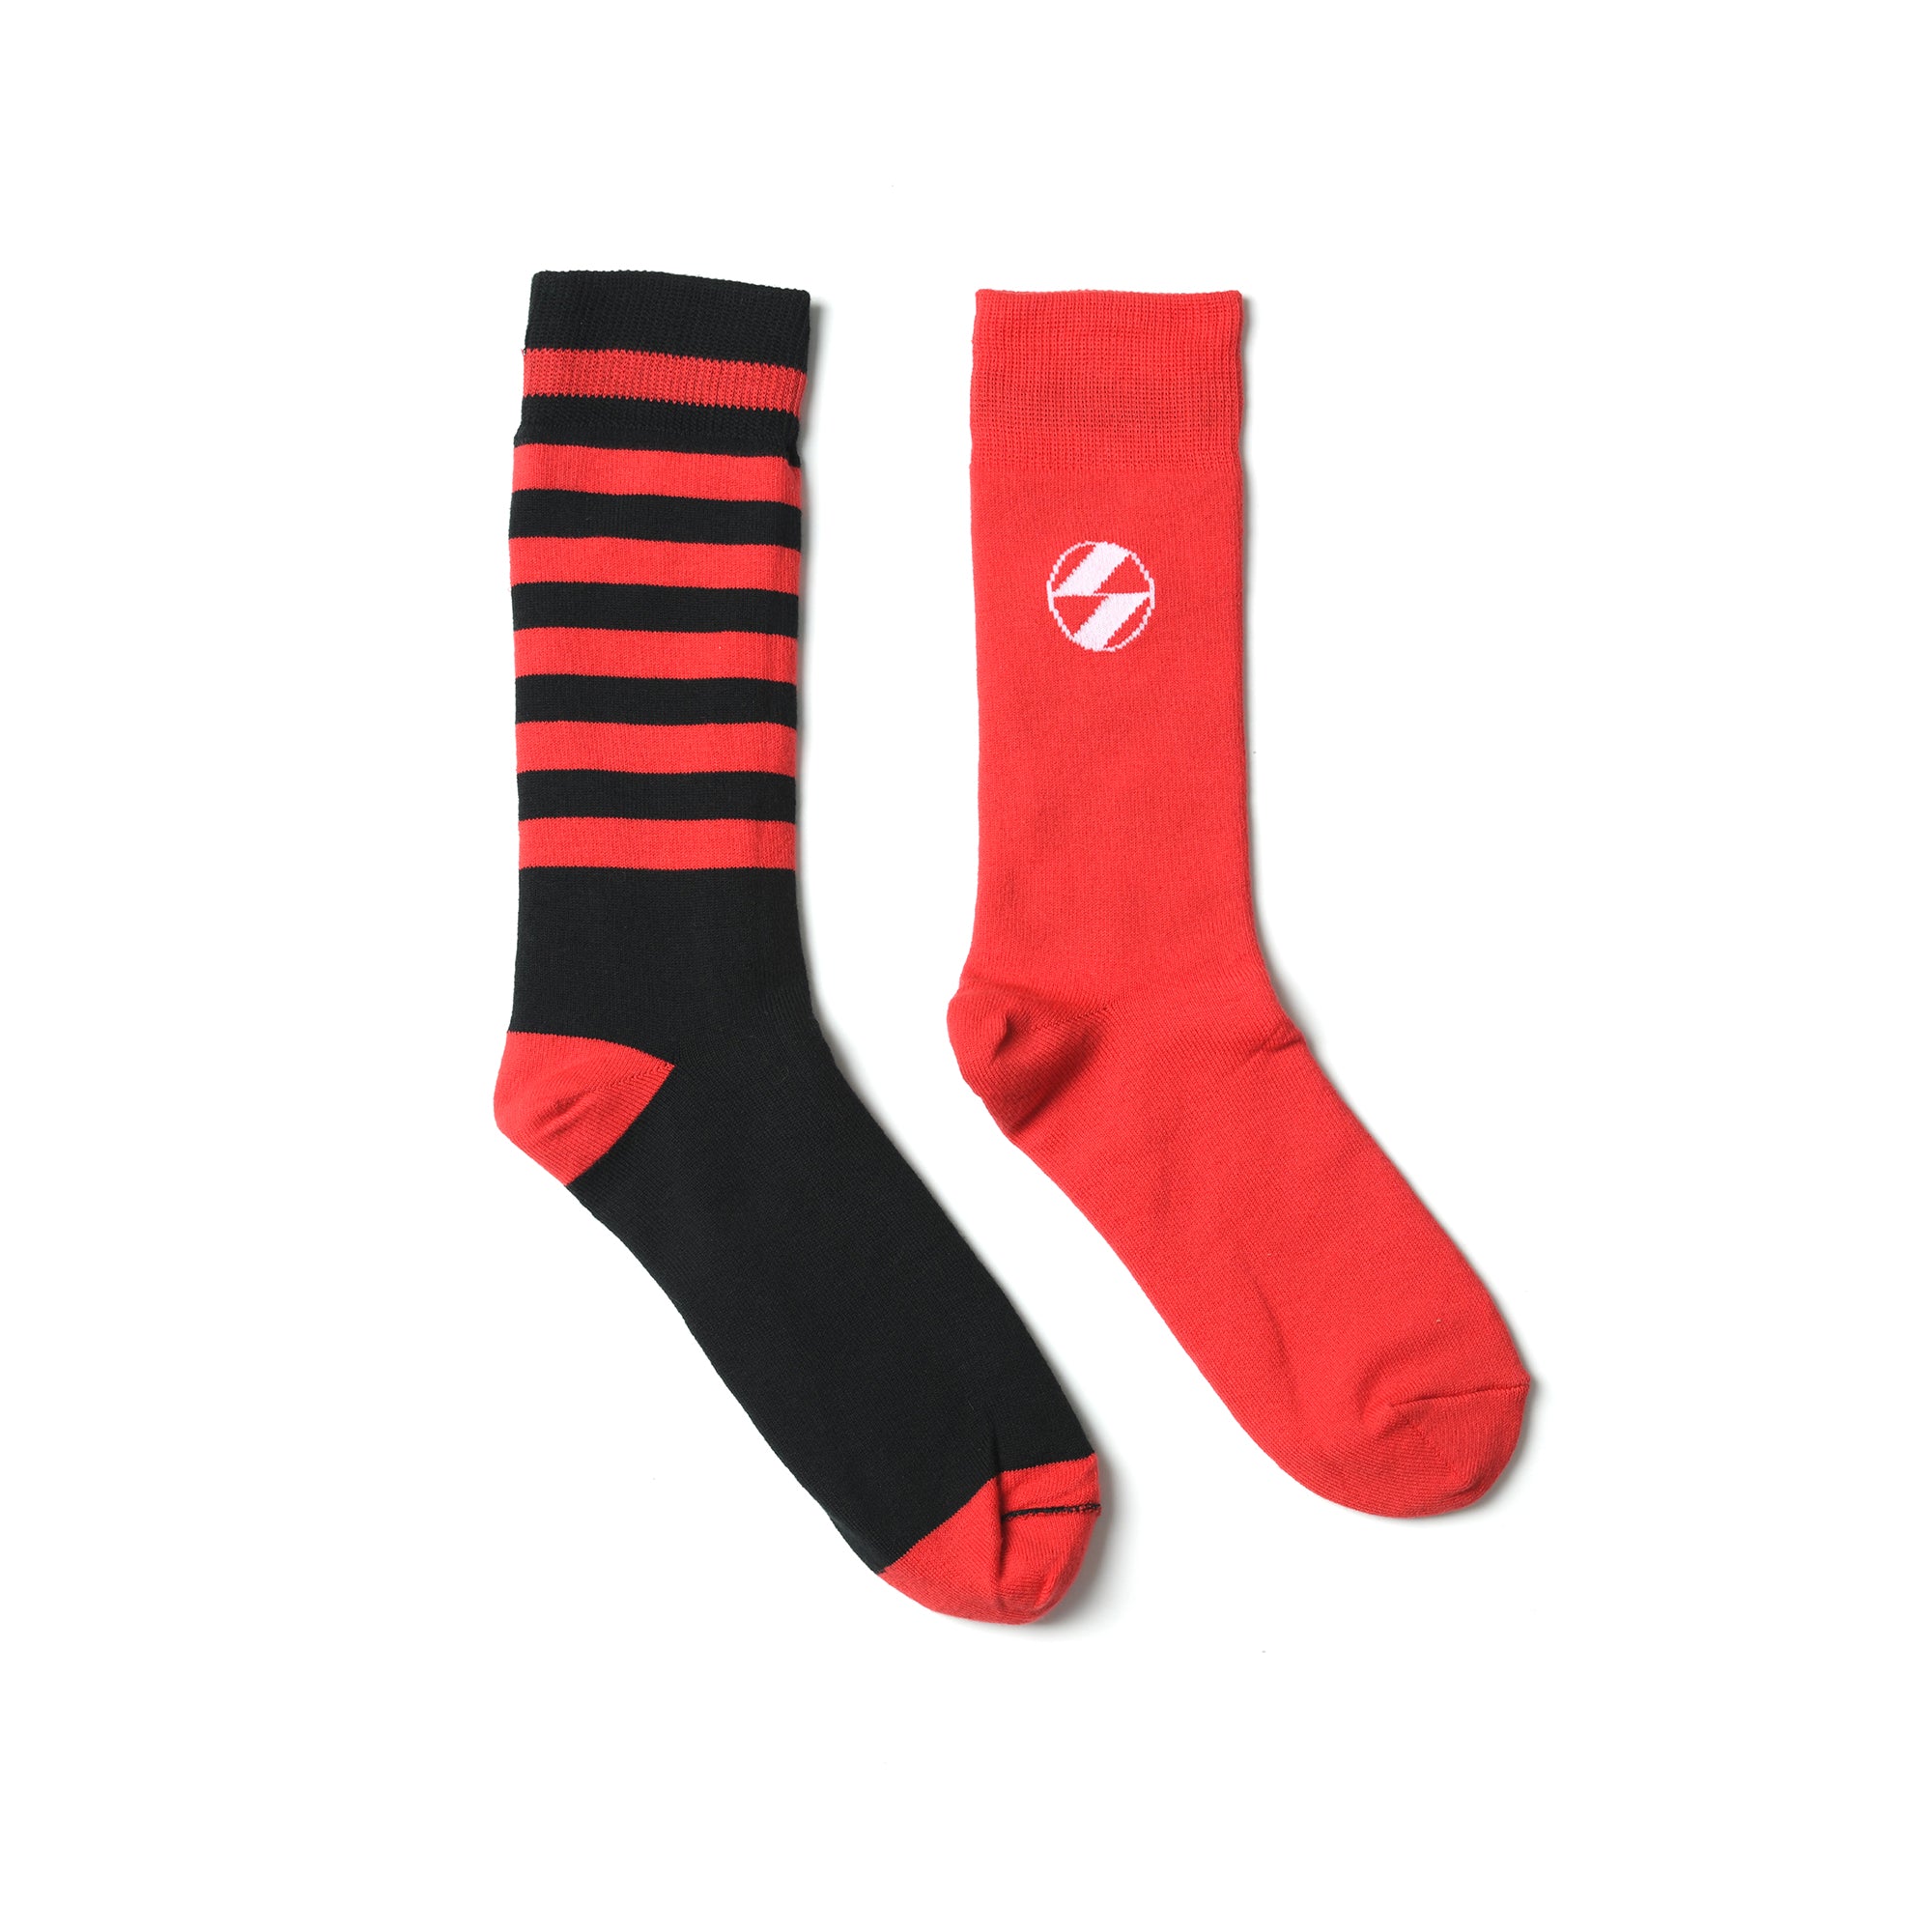 The Salvages x decka Reversible Mismatched Socks